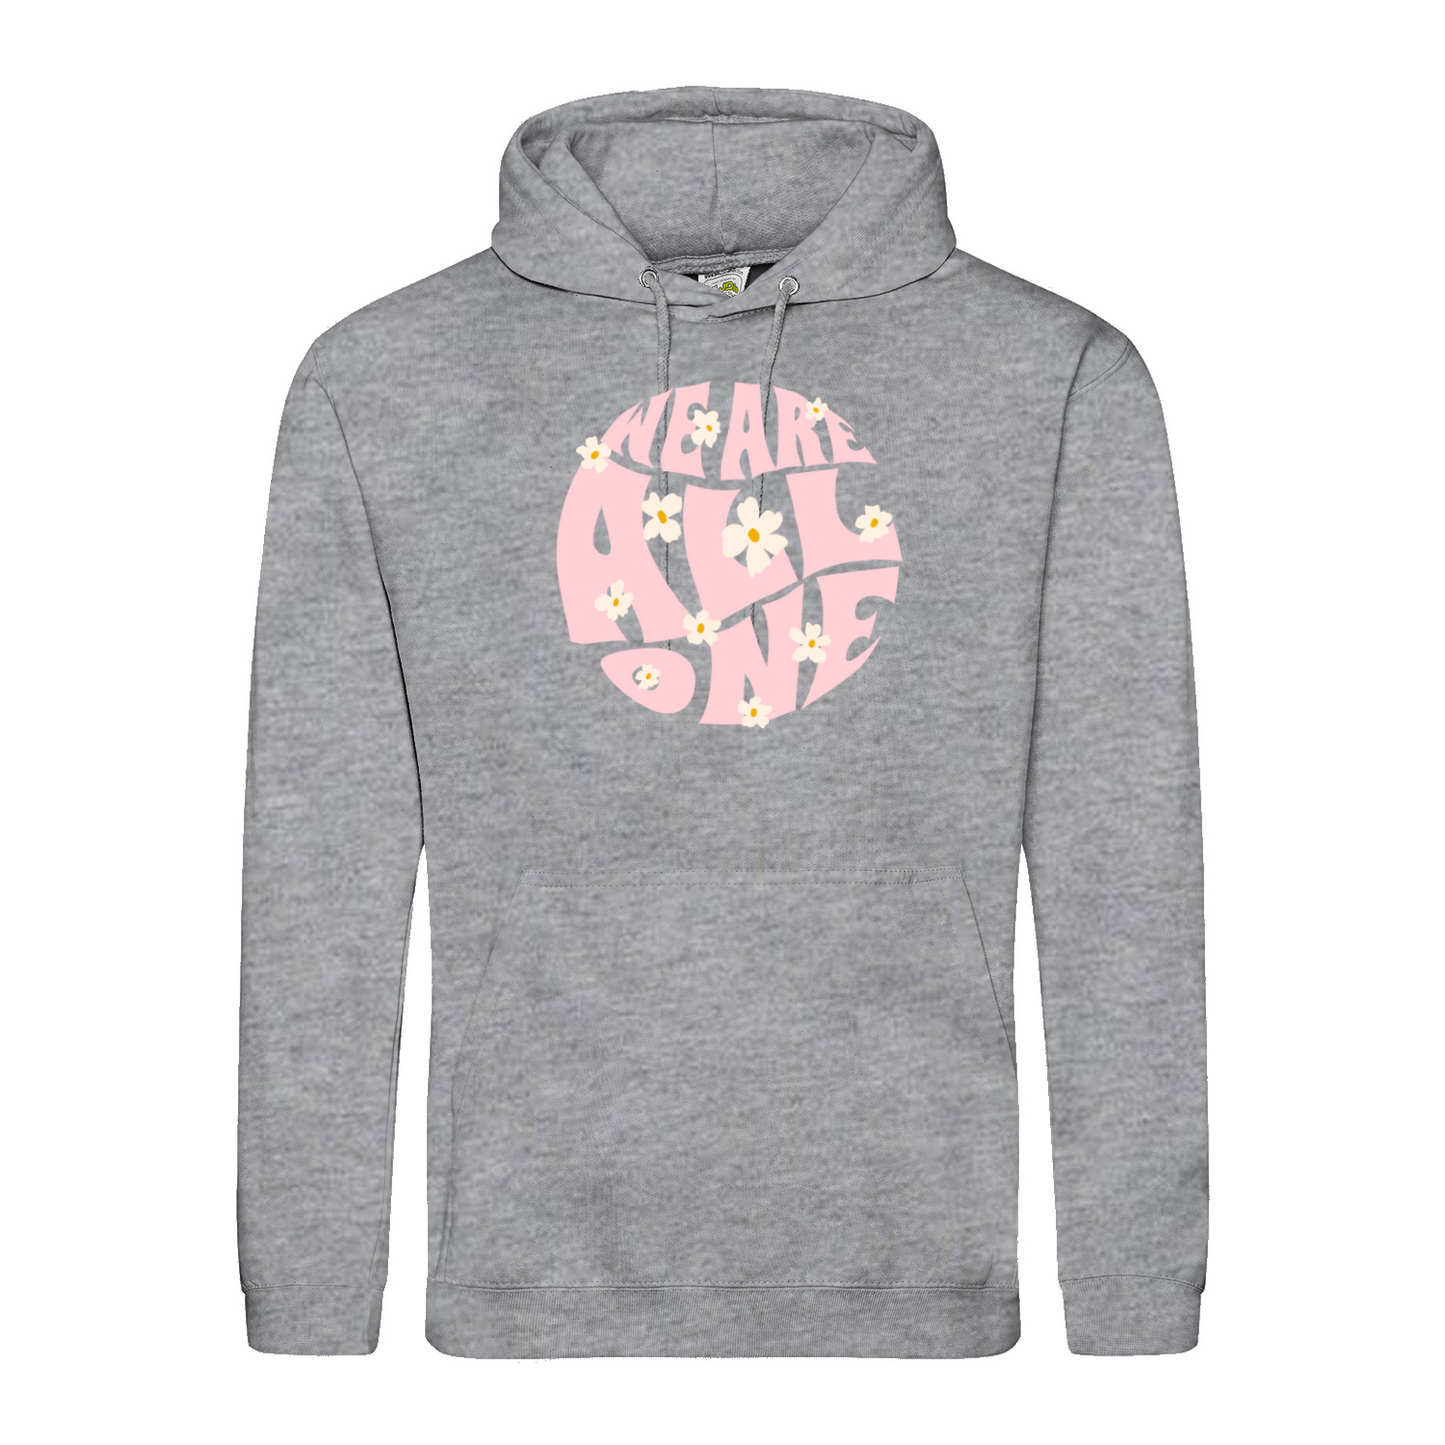 Hoodie "We Are All One"